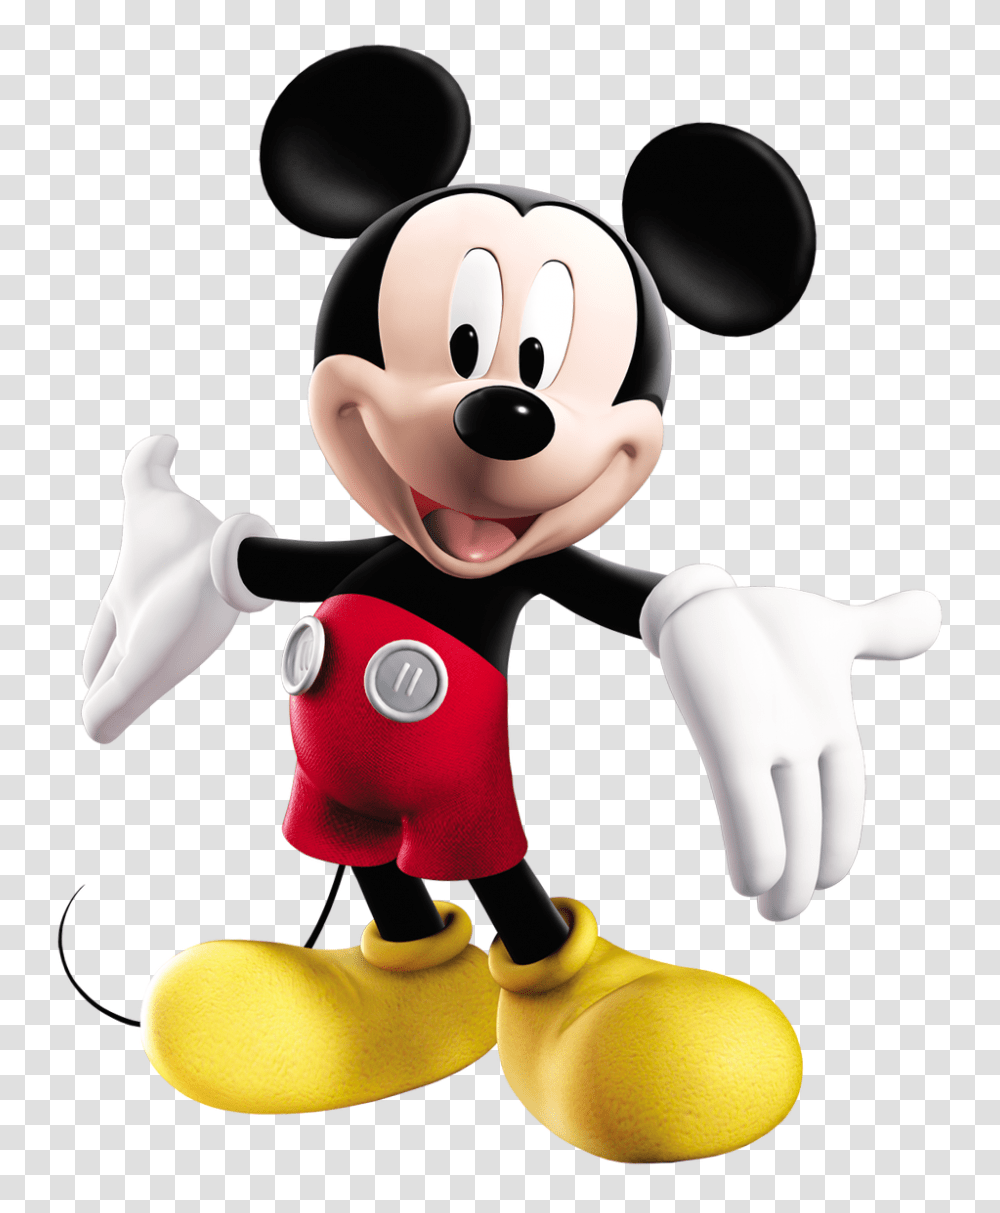 Mickey Mouse Images Free Download, Toy, Apparel, Video Gaming Transparent Png